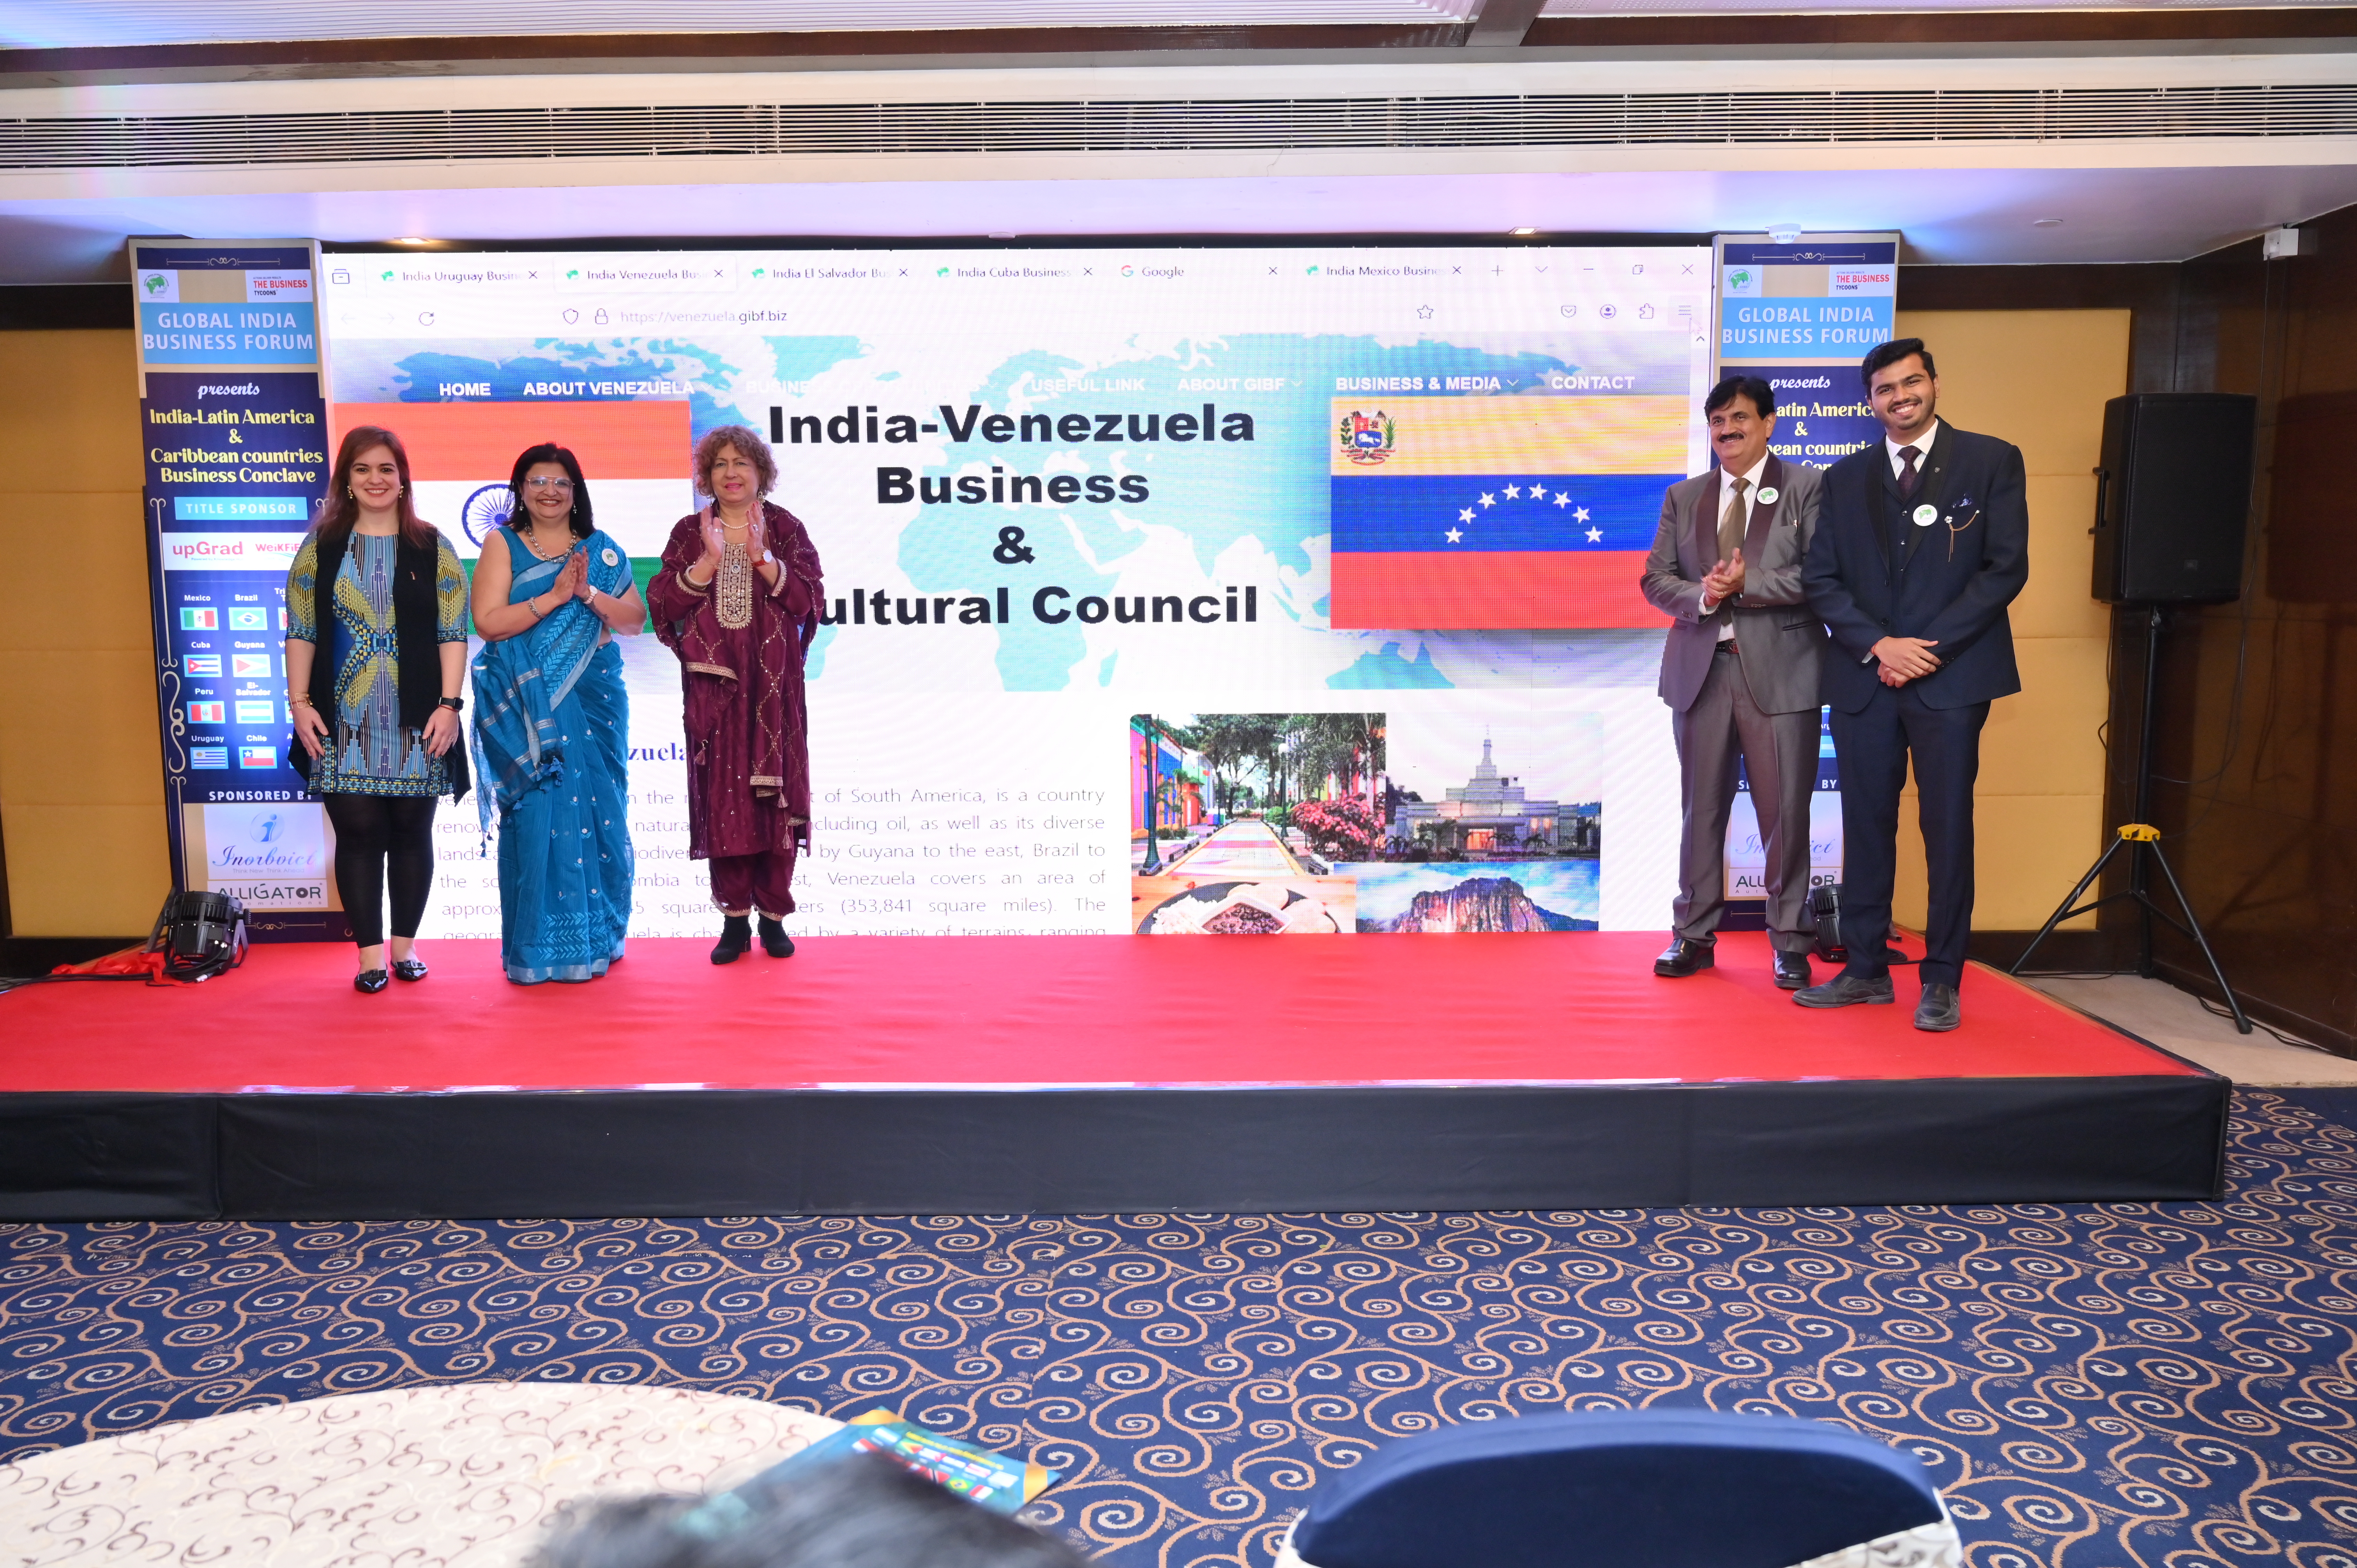 gibf-past-event-india-latin-america-and-caribbean-country-business-conclave-venezuela-website-of-india-venezuela-business-and-cultural-council-2024